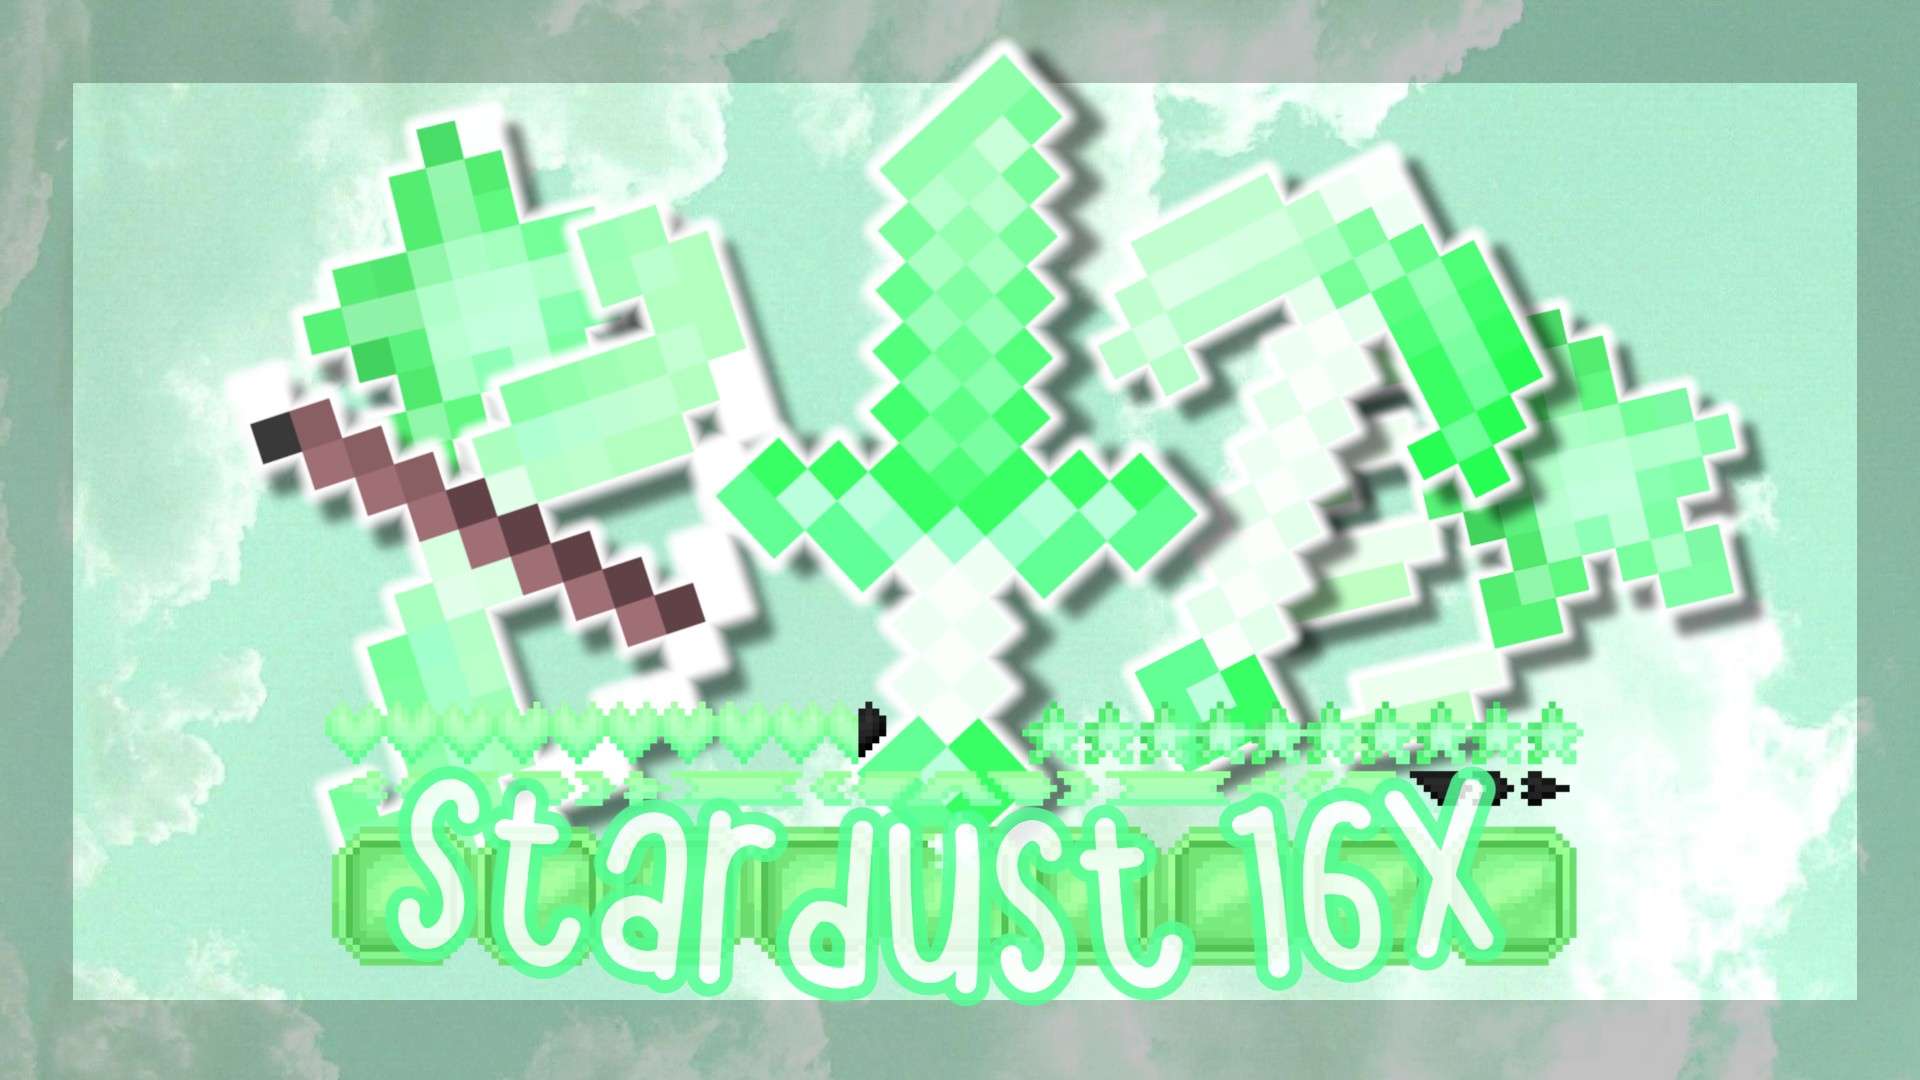 stardust 16x by veebri on PvPRP